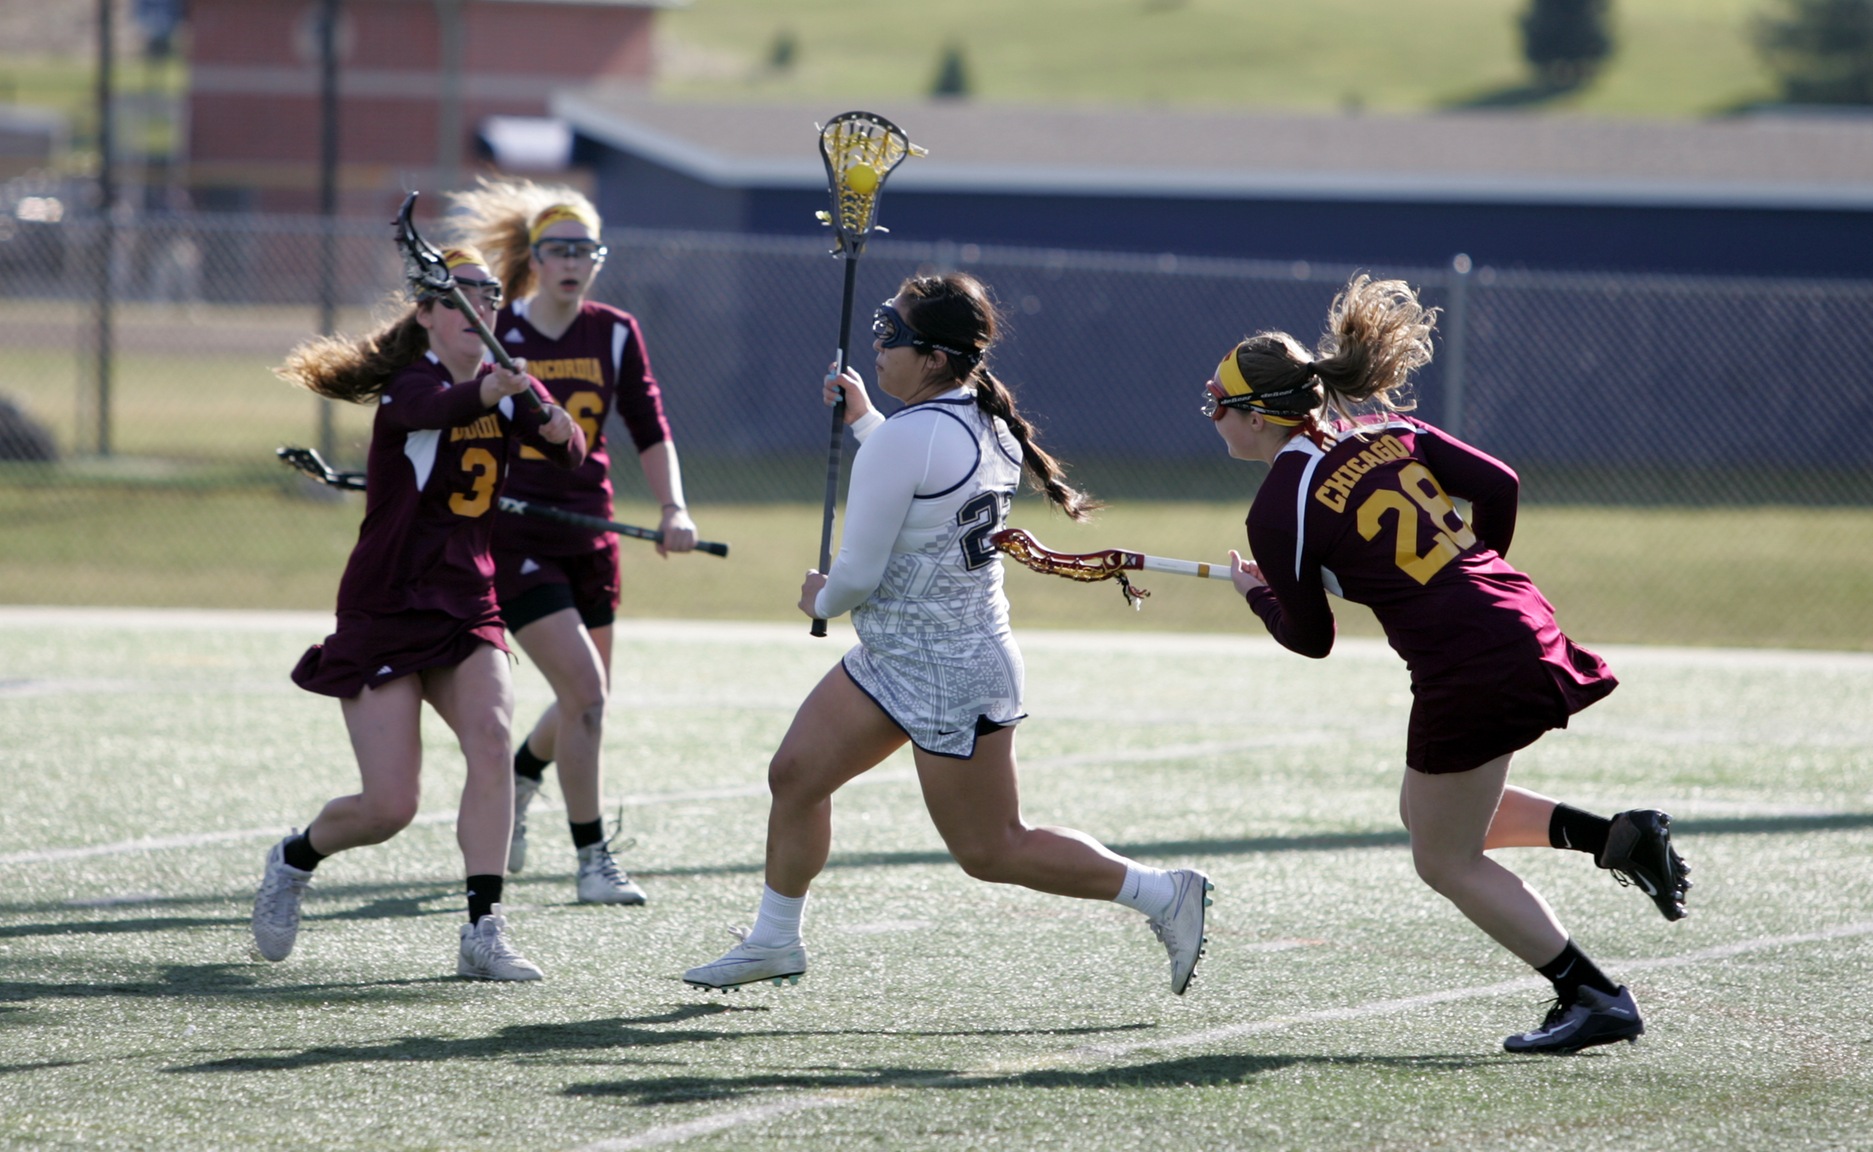 Gallego Scores Three Goals in Women’s Lacrosse Loss to Saint Mary’s